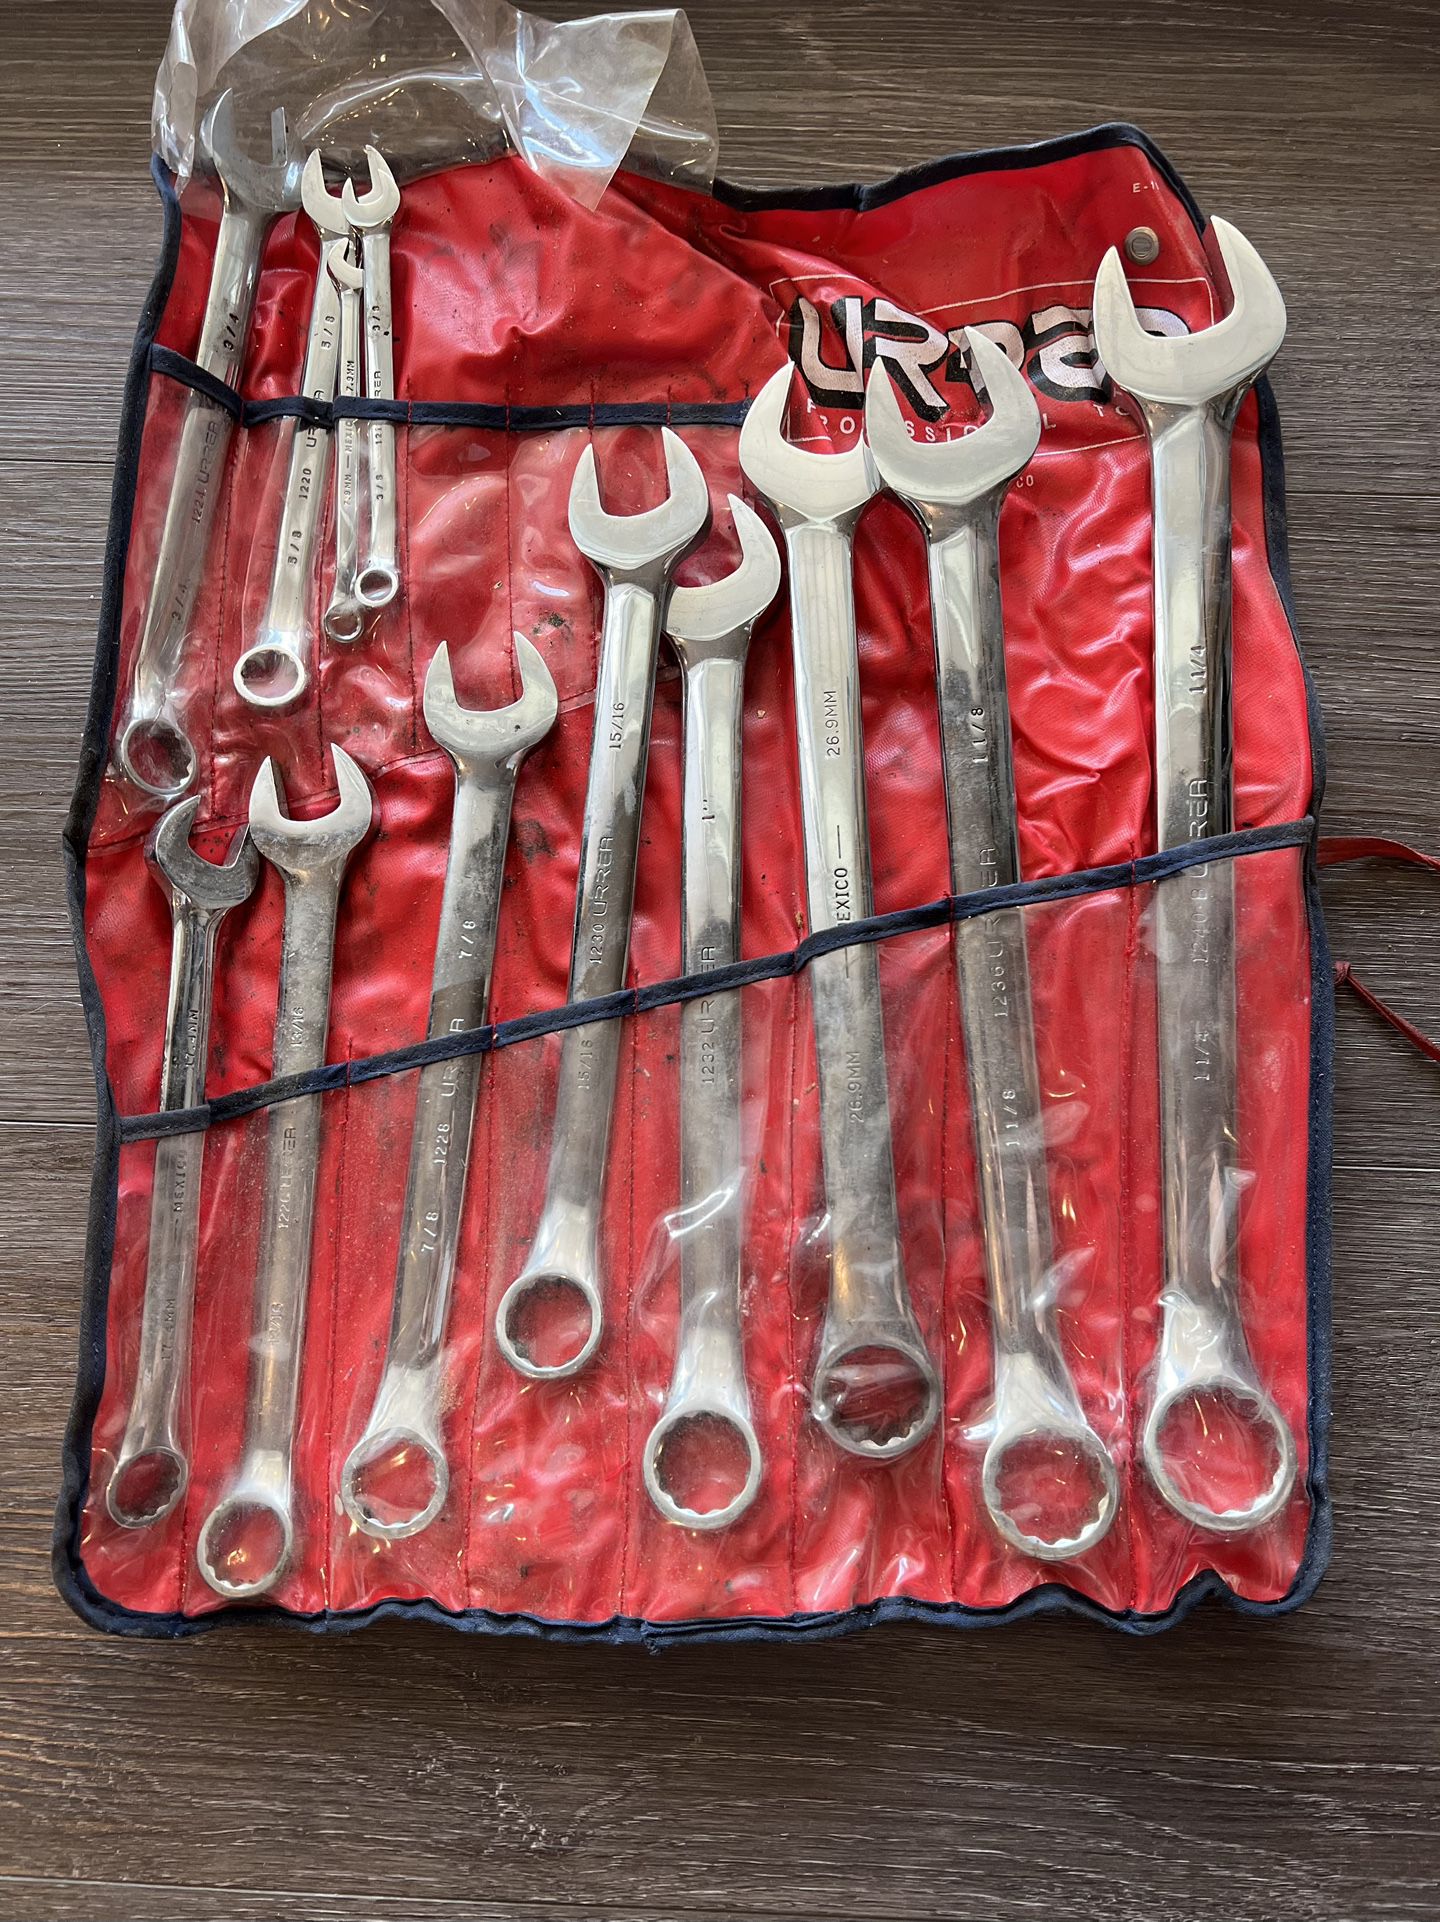 Wrench Set 